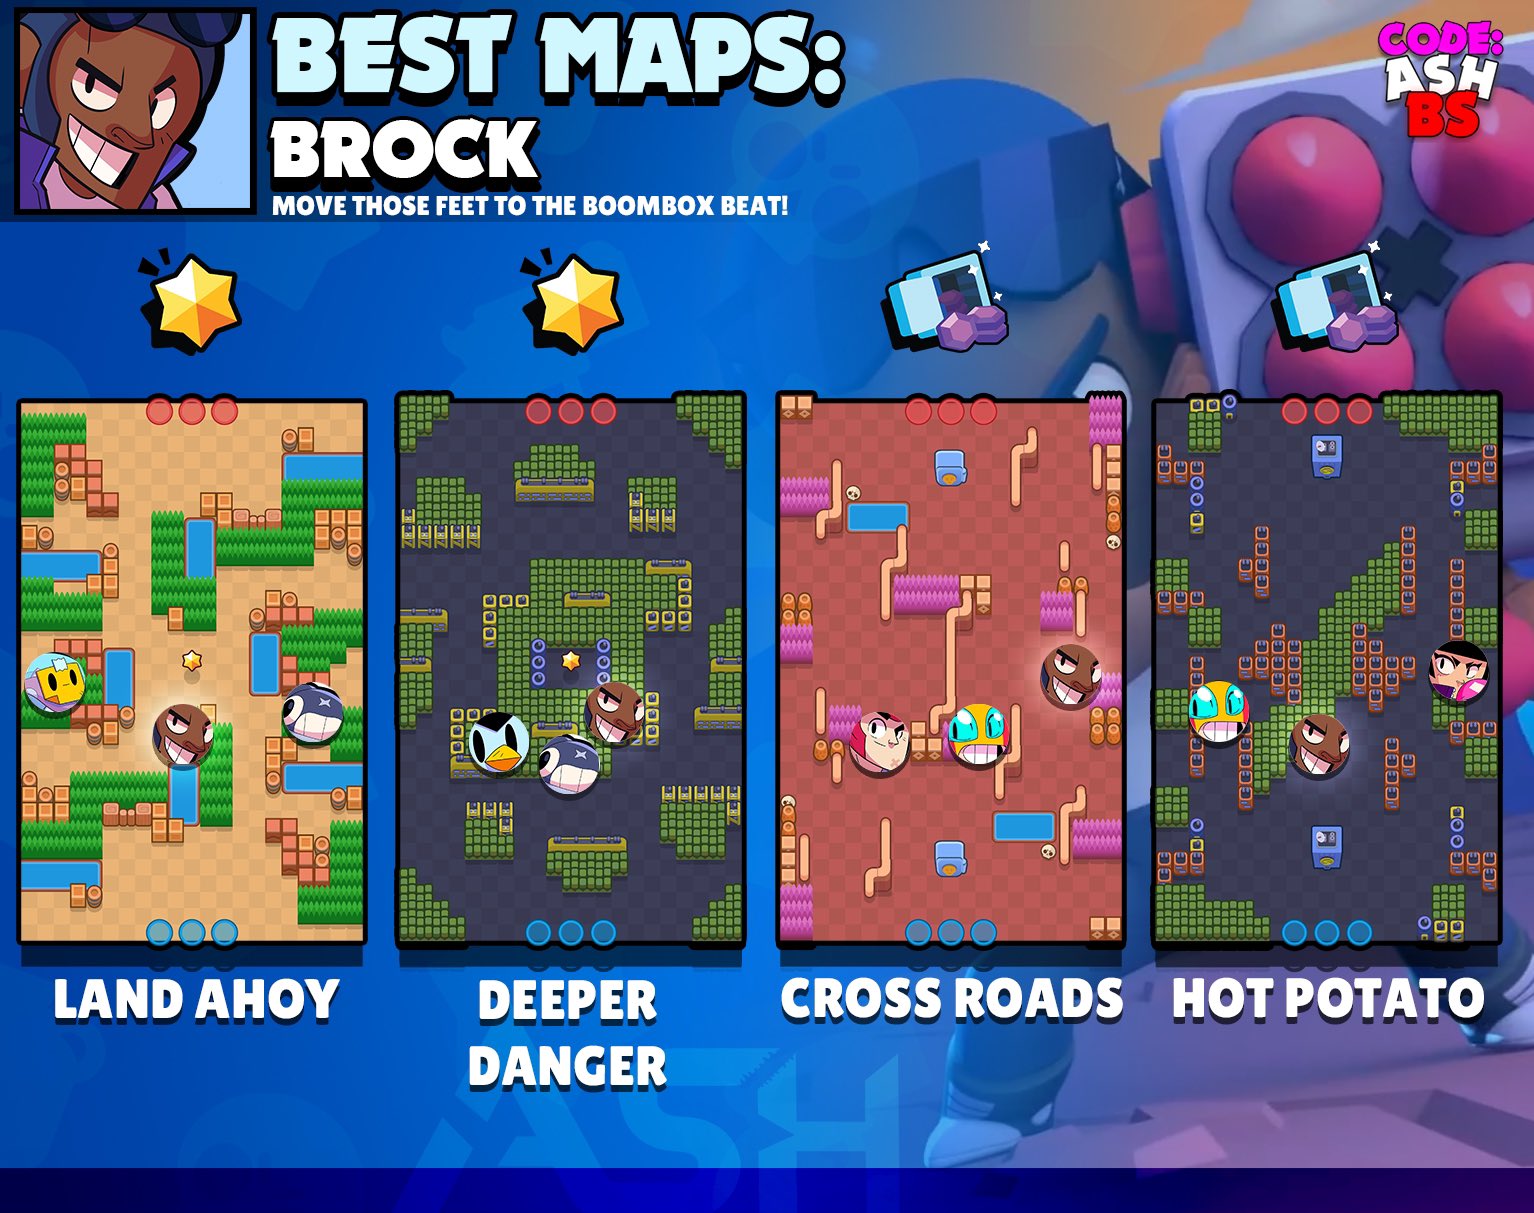 Code Ashbs On Twitter Brock Tier List For Every Game Mode With Best Maps And Suggested Comps Which Brawler Should I Do Next Brock Brawlstars Https T Co Igweji73sr - brawl star de biscuit